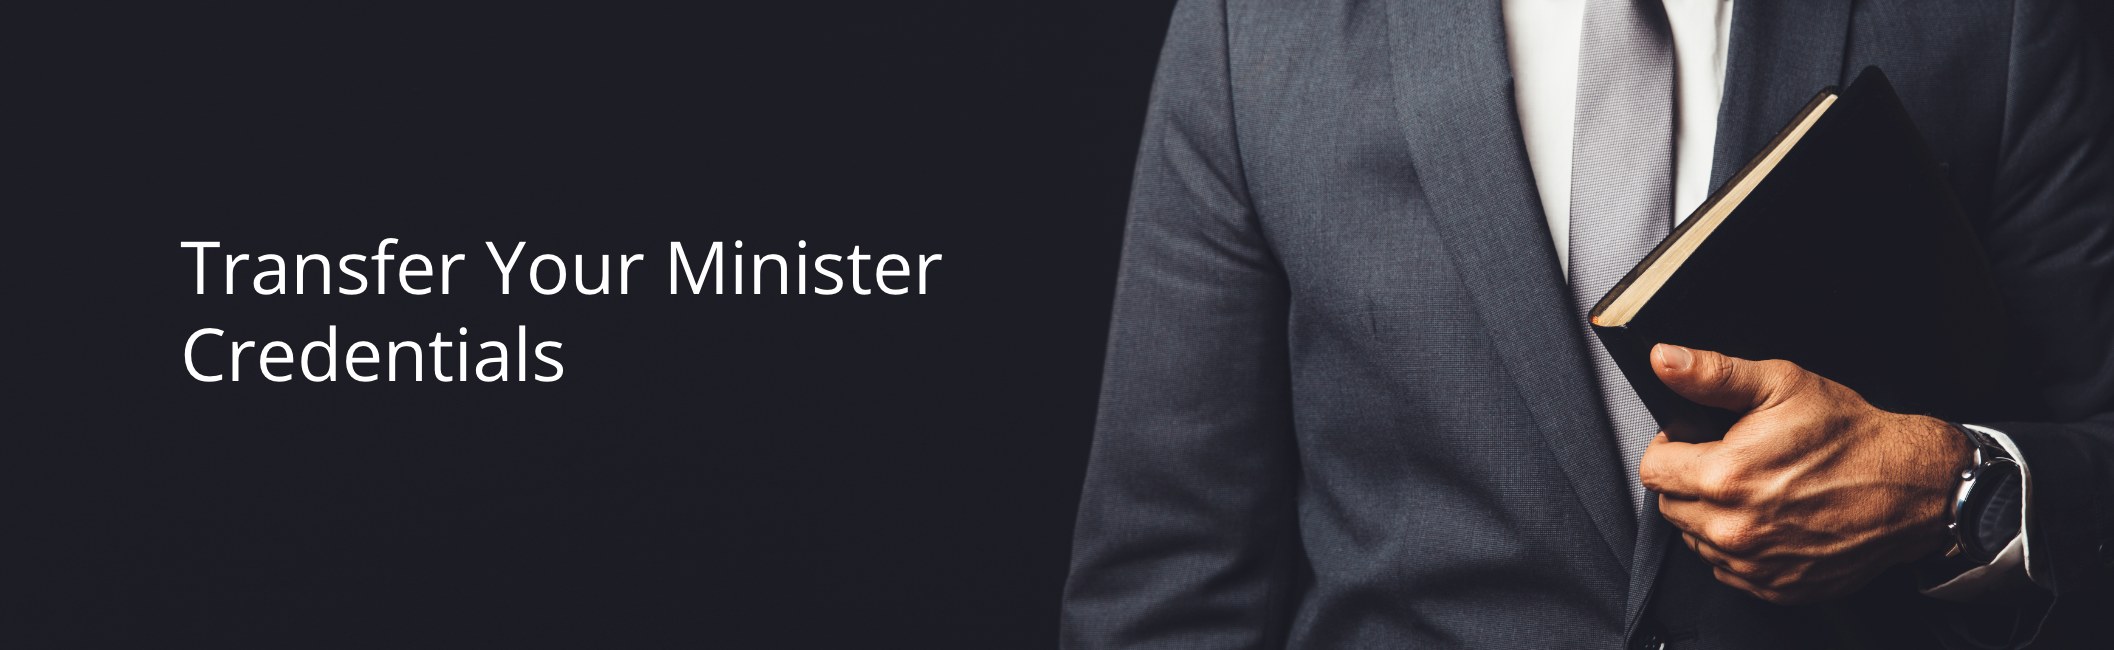 Transfer Your Minister Credentials